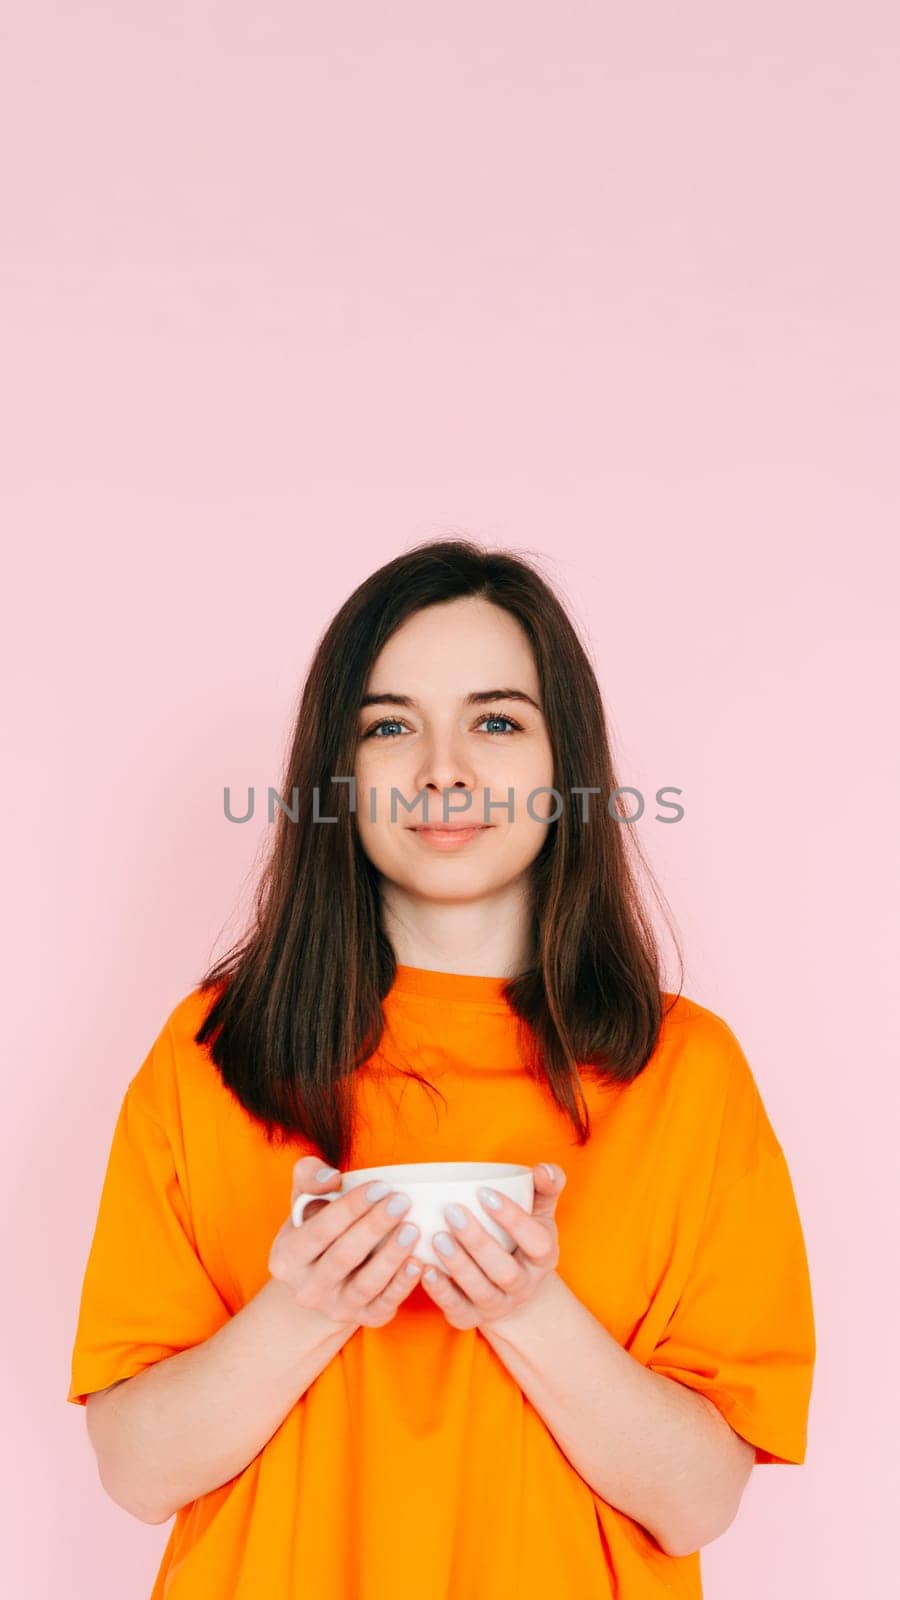 Serene Leisure: Charming Woman in Orange Attire, Savoring a Delightful Drink in a Mug - Relishing Free Time After Work, Tranquility and Bliss Isolated on Pink Background by ViShark